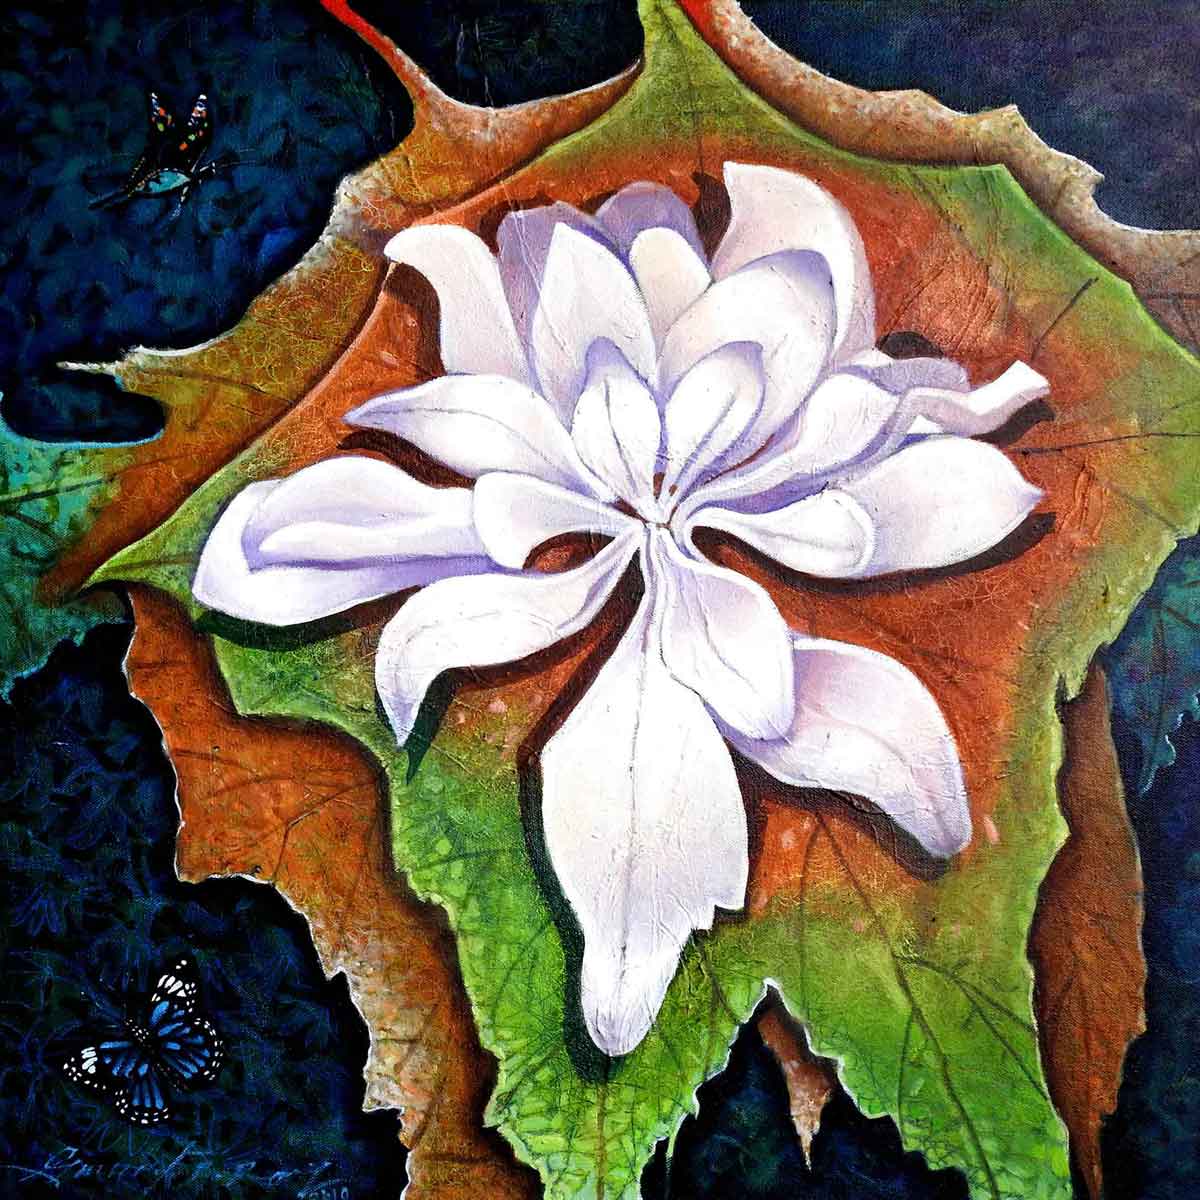 Conceptual Painting with Oil on Canvas "Essence of Leaves-2" art by Gautam Partho Roy